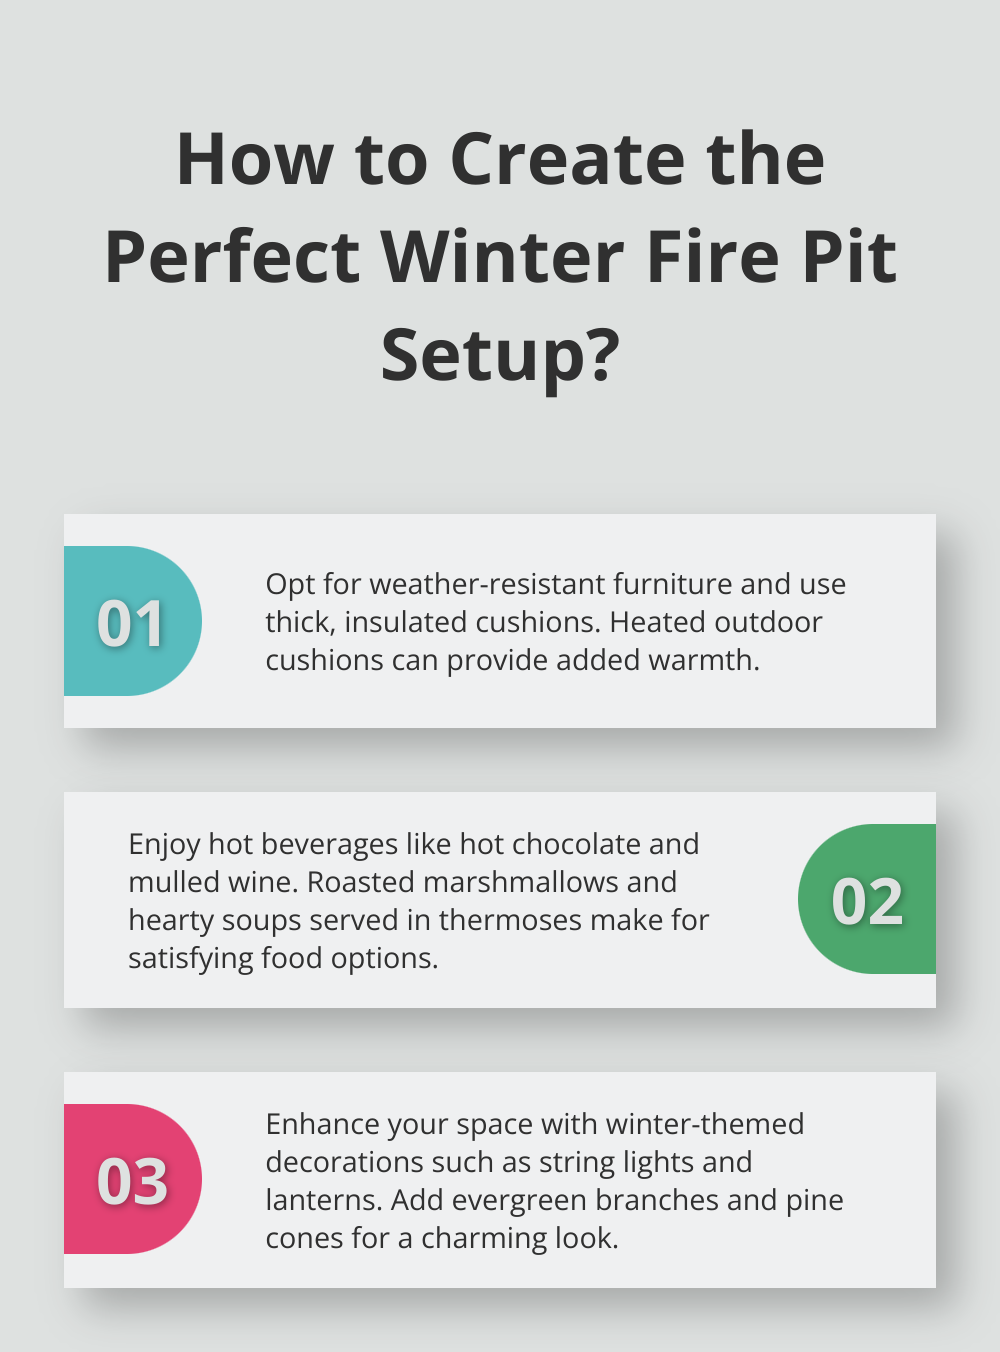 Fact - How to Create the Perfect Winter Fire Pit Setup?